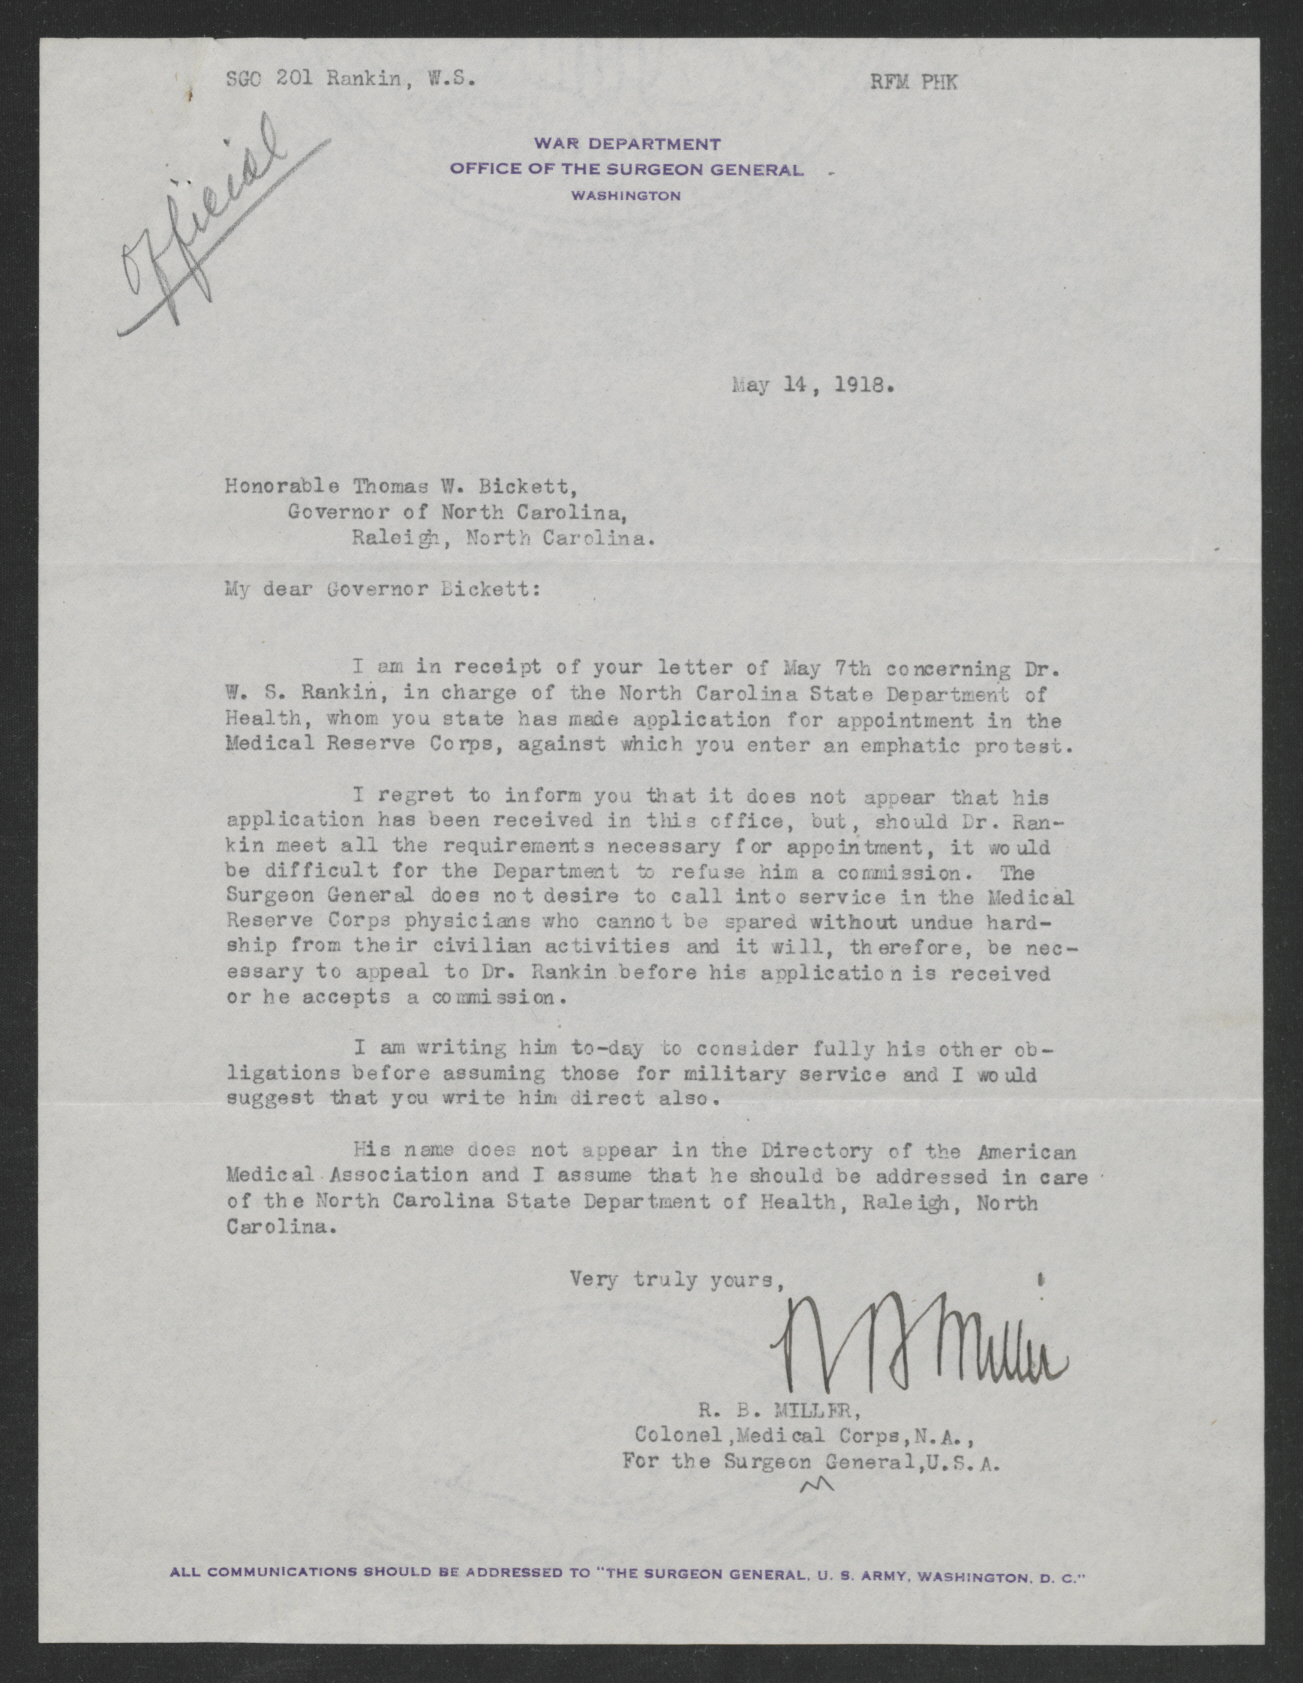 Letter from Reuben B. Miller to Thomas W. Bickett, May 14, 1918